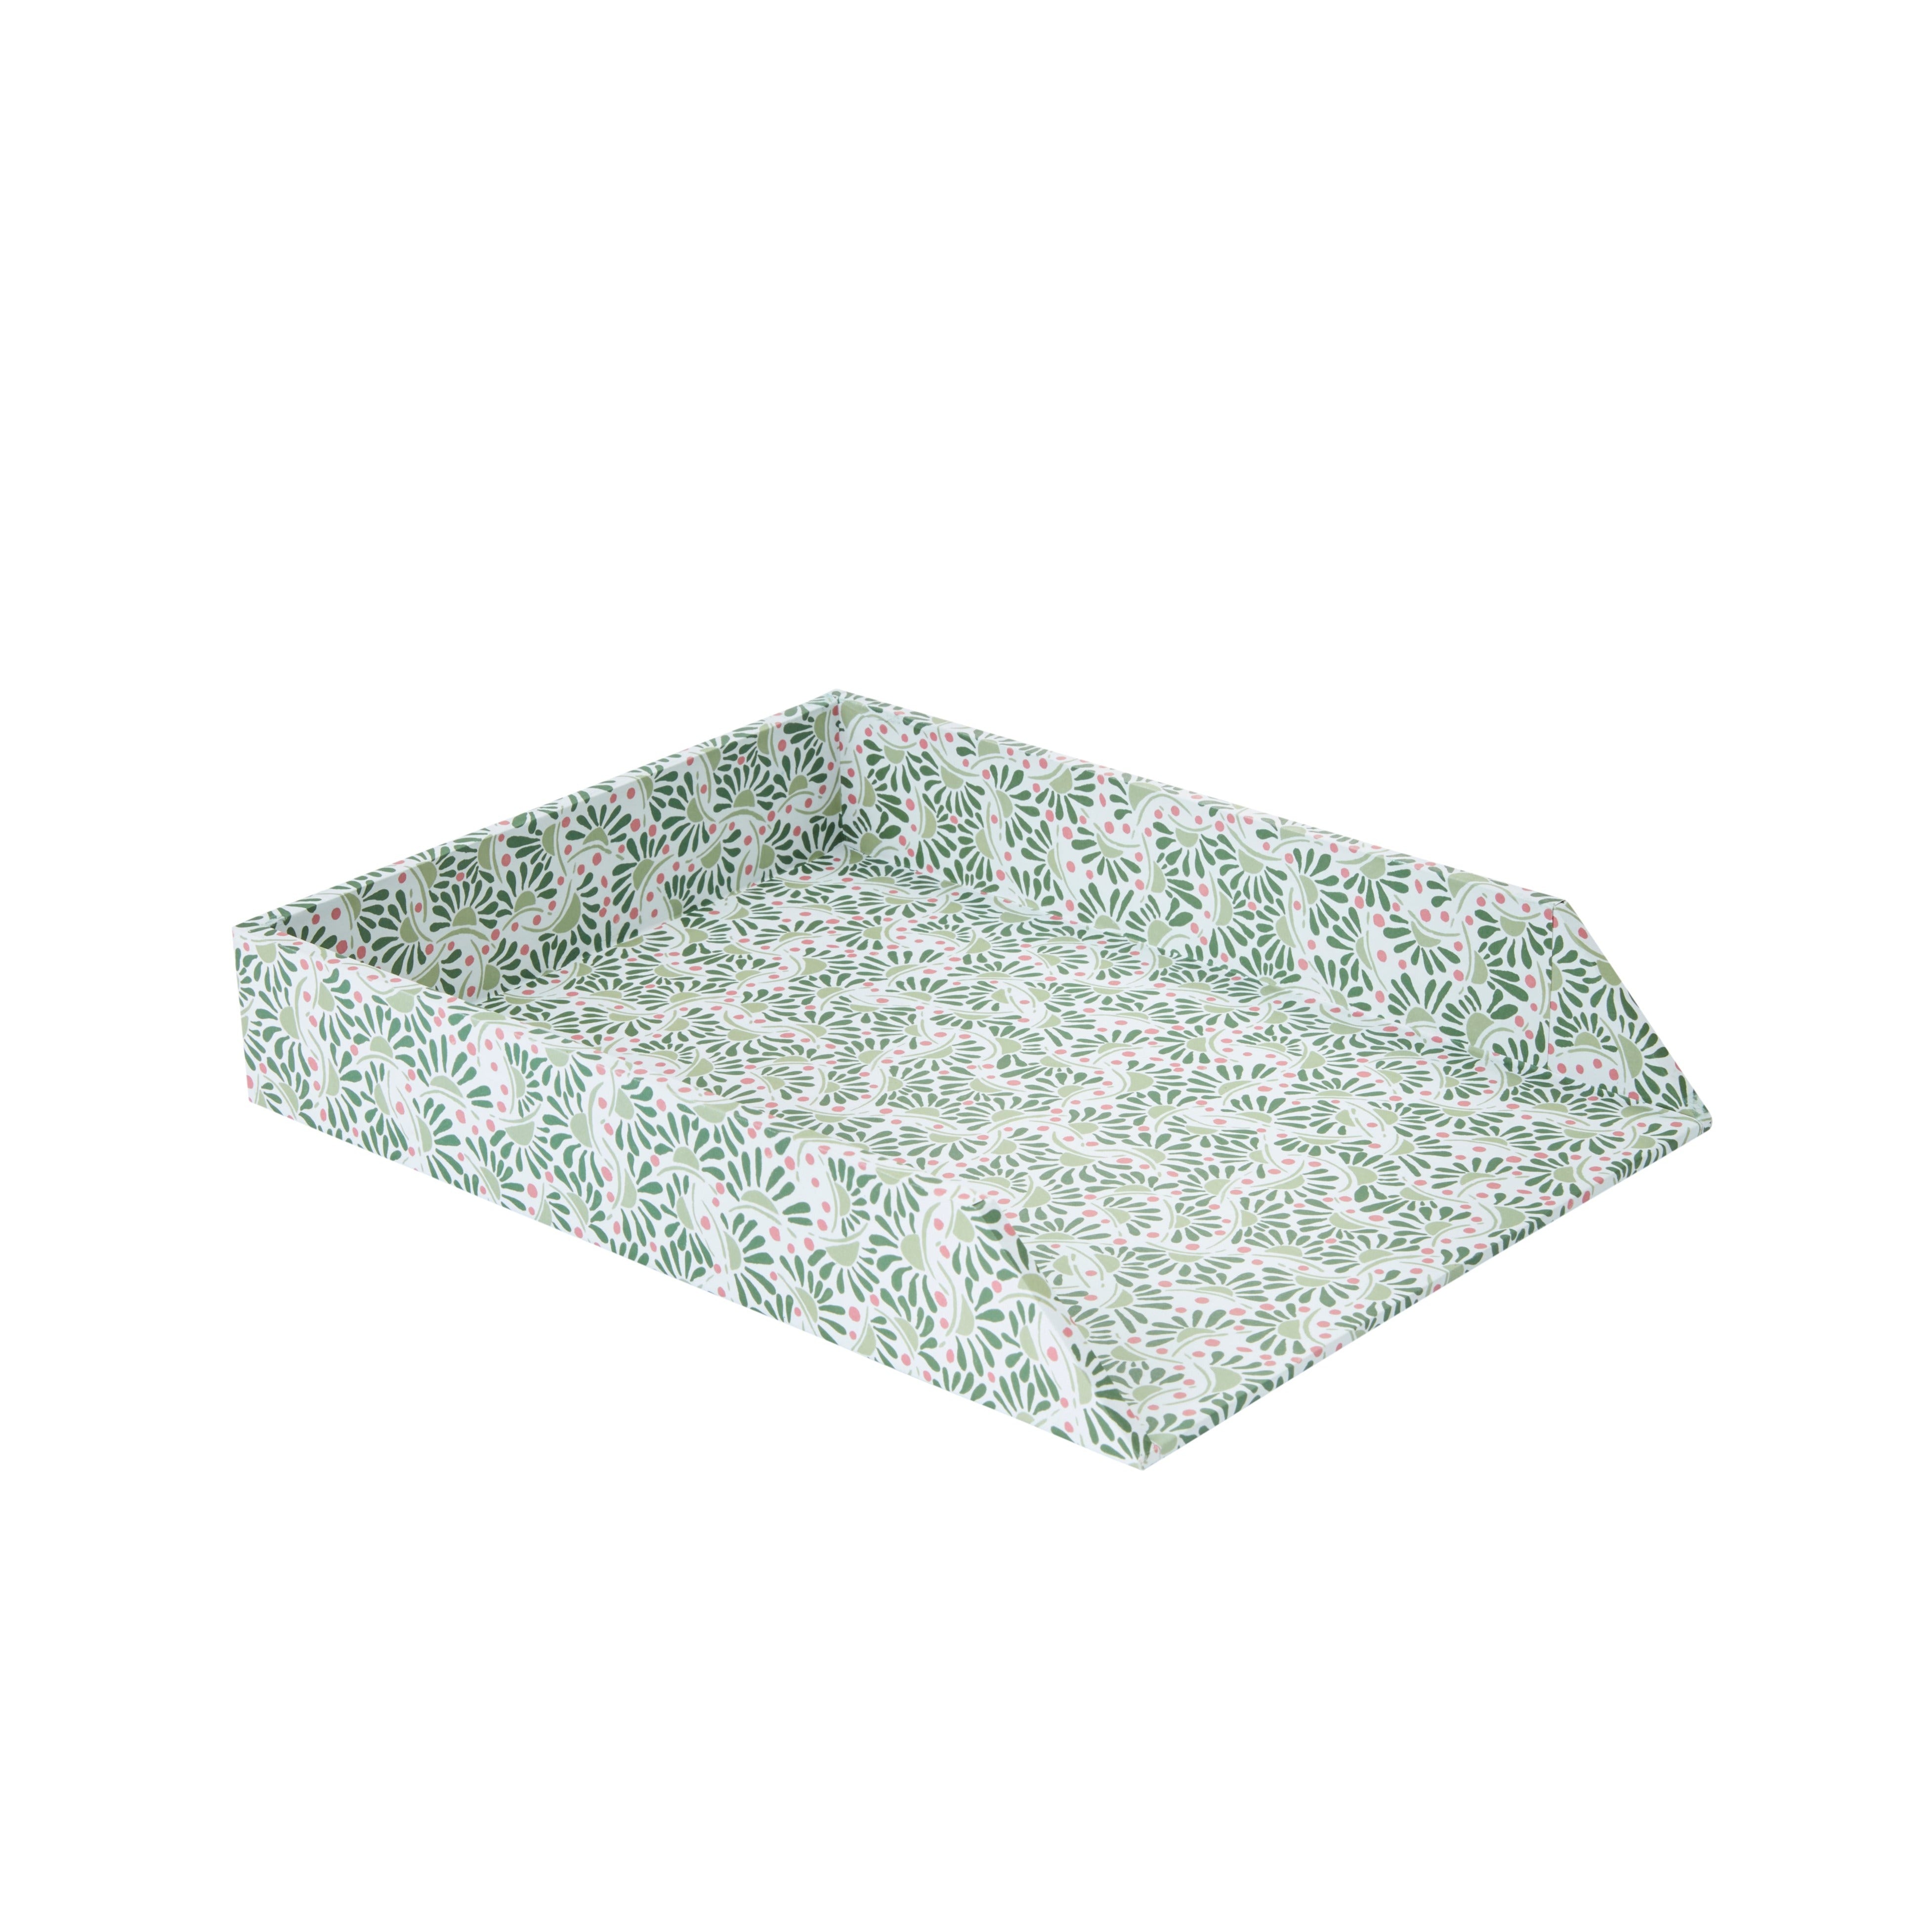 Nina Campbell letter tray in coral colour way stationery collection on white background